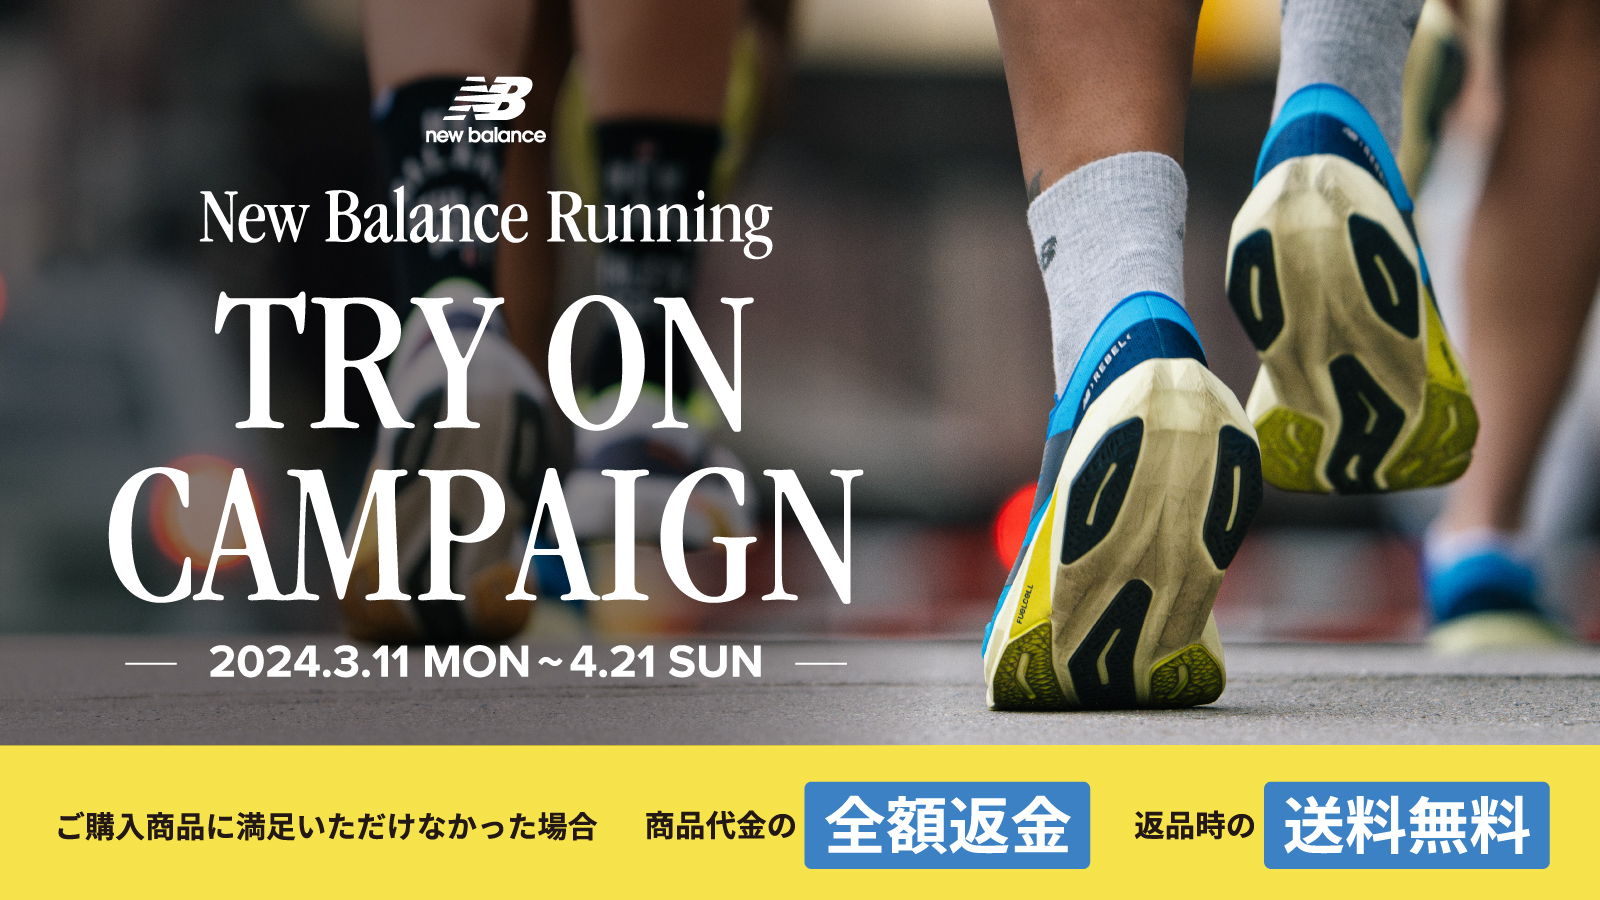 【New Balance(ニューバランス)】TRY ON CAMPAIGN